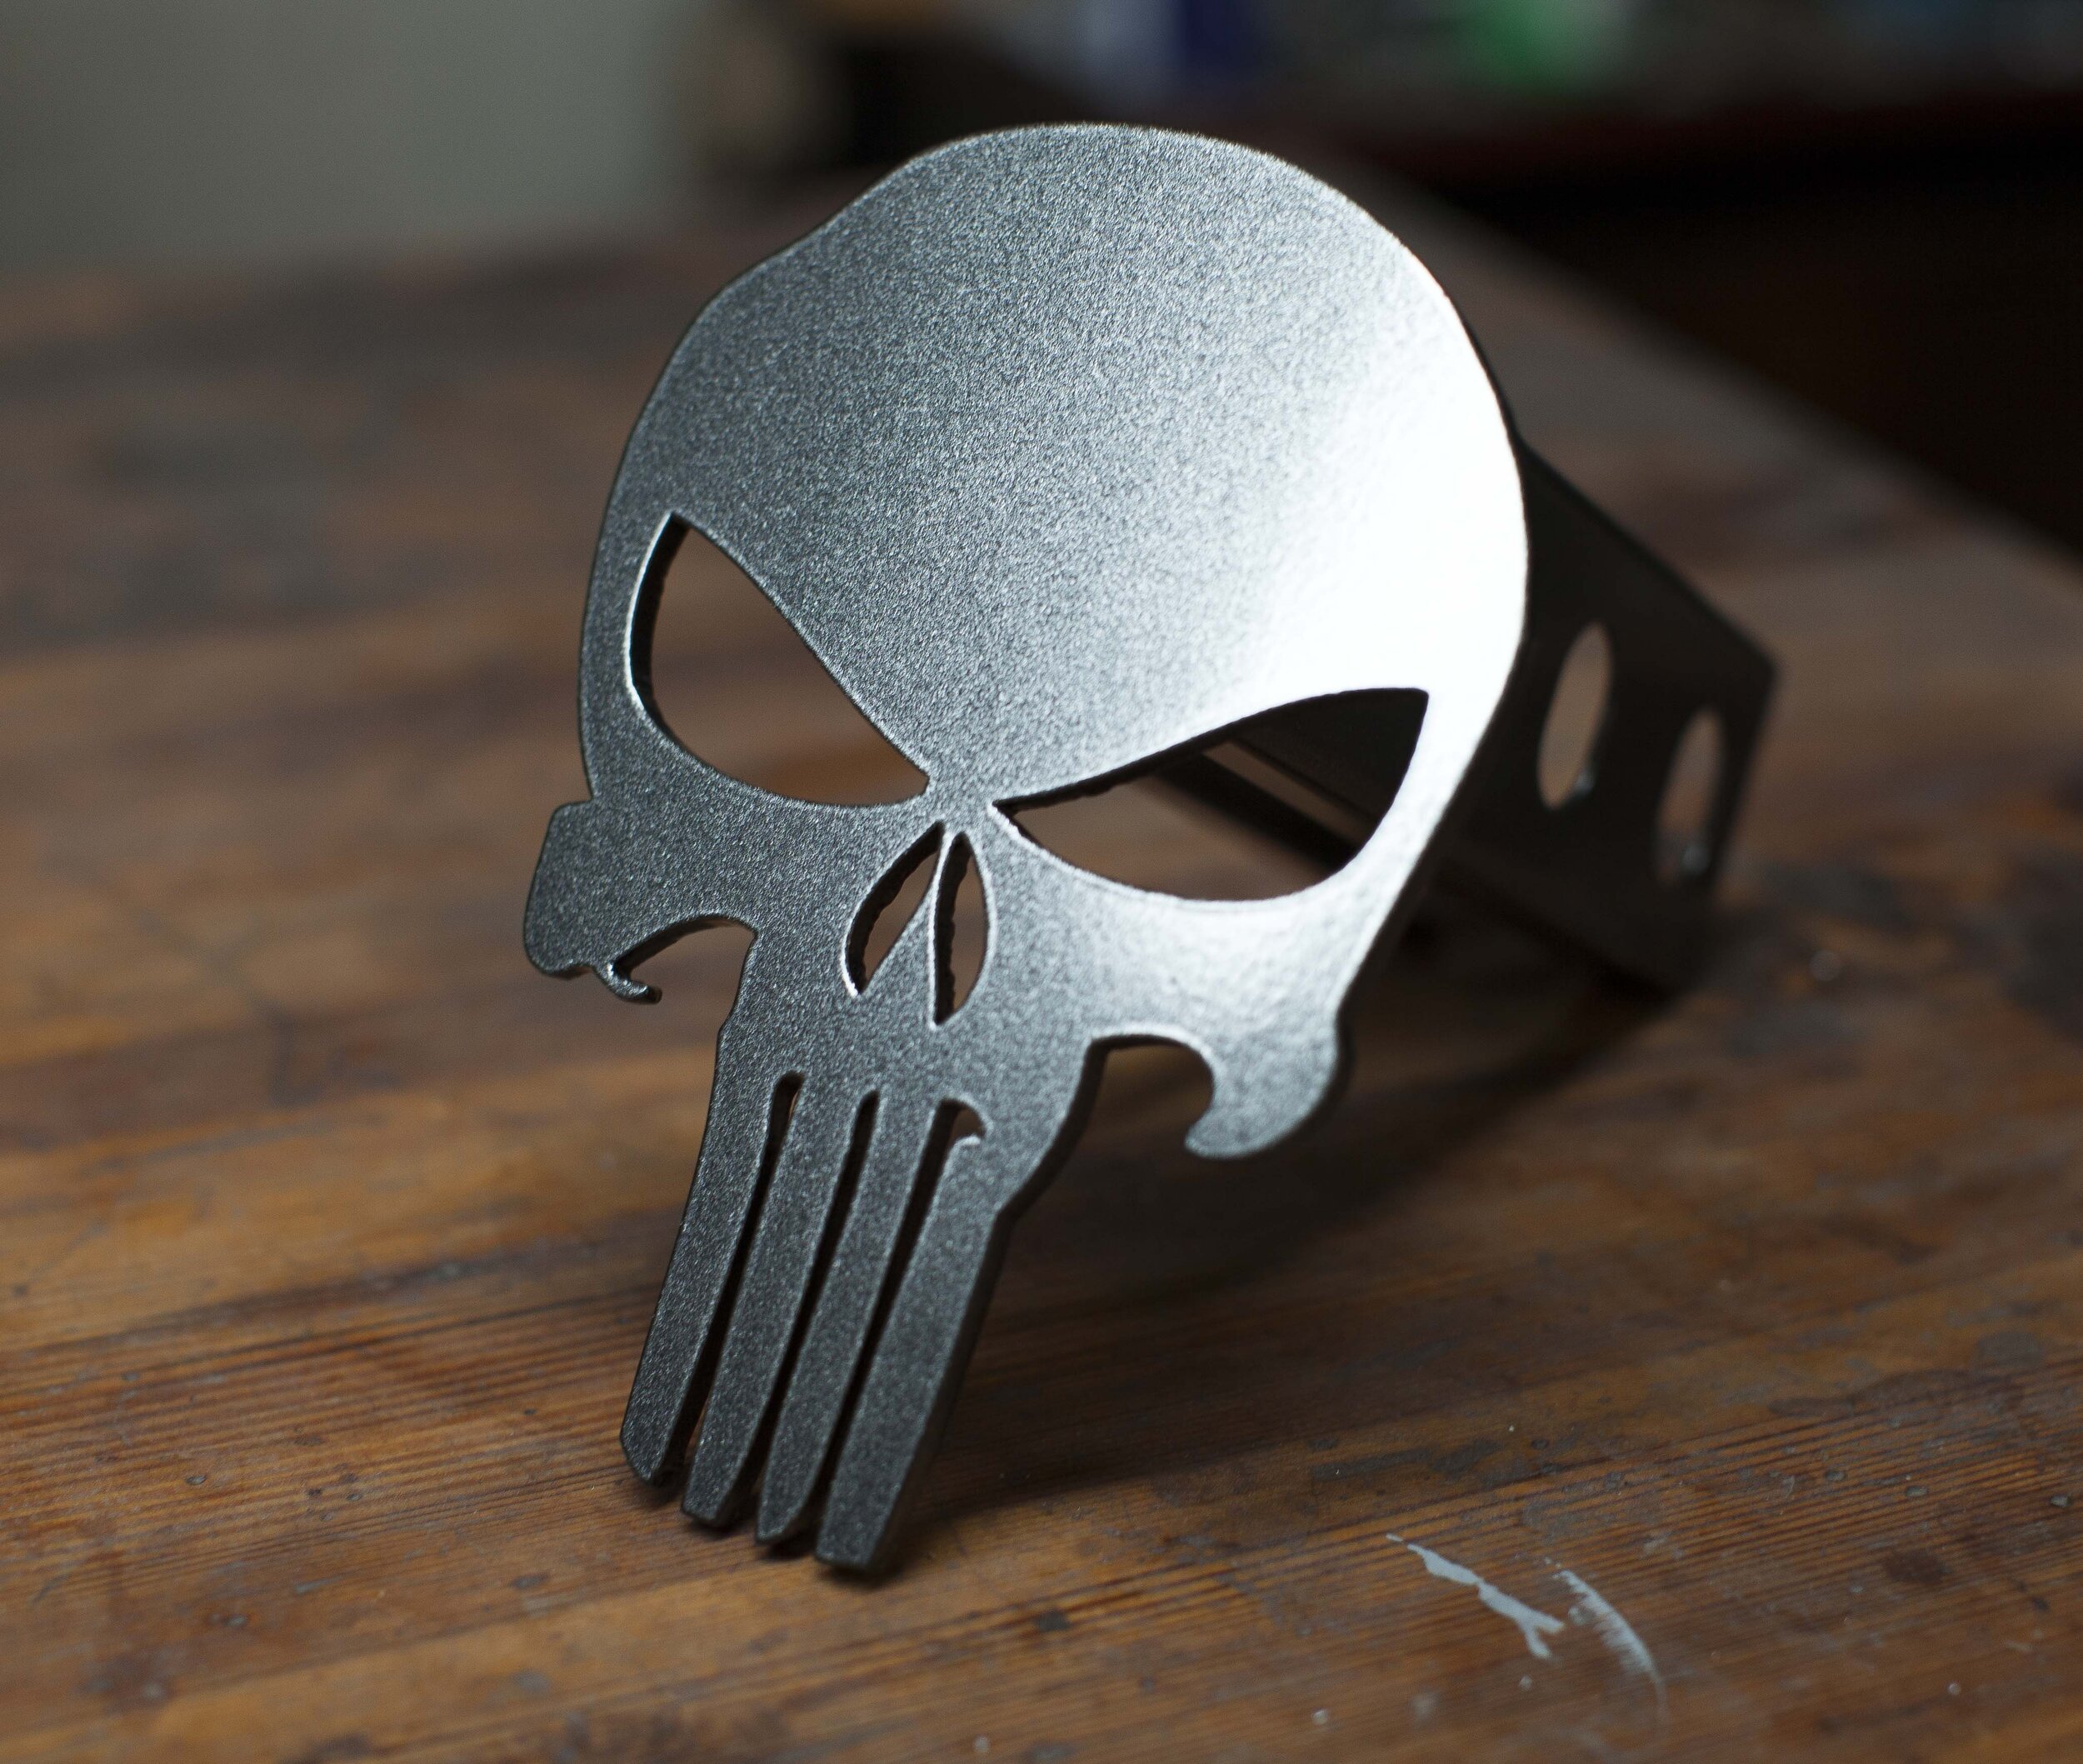 Custom Hitch Covers 12779-Black Punisher Skull Hitch Cover 2 